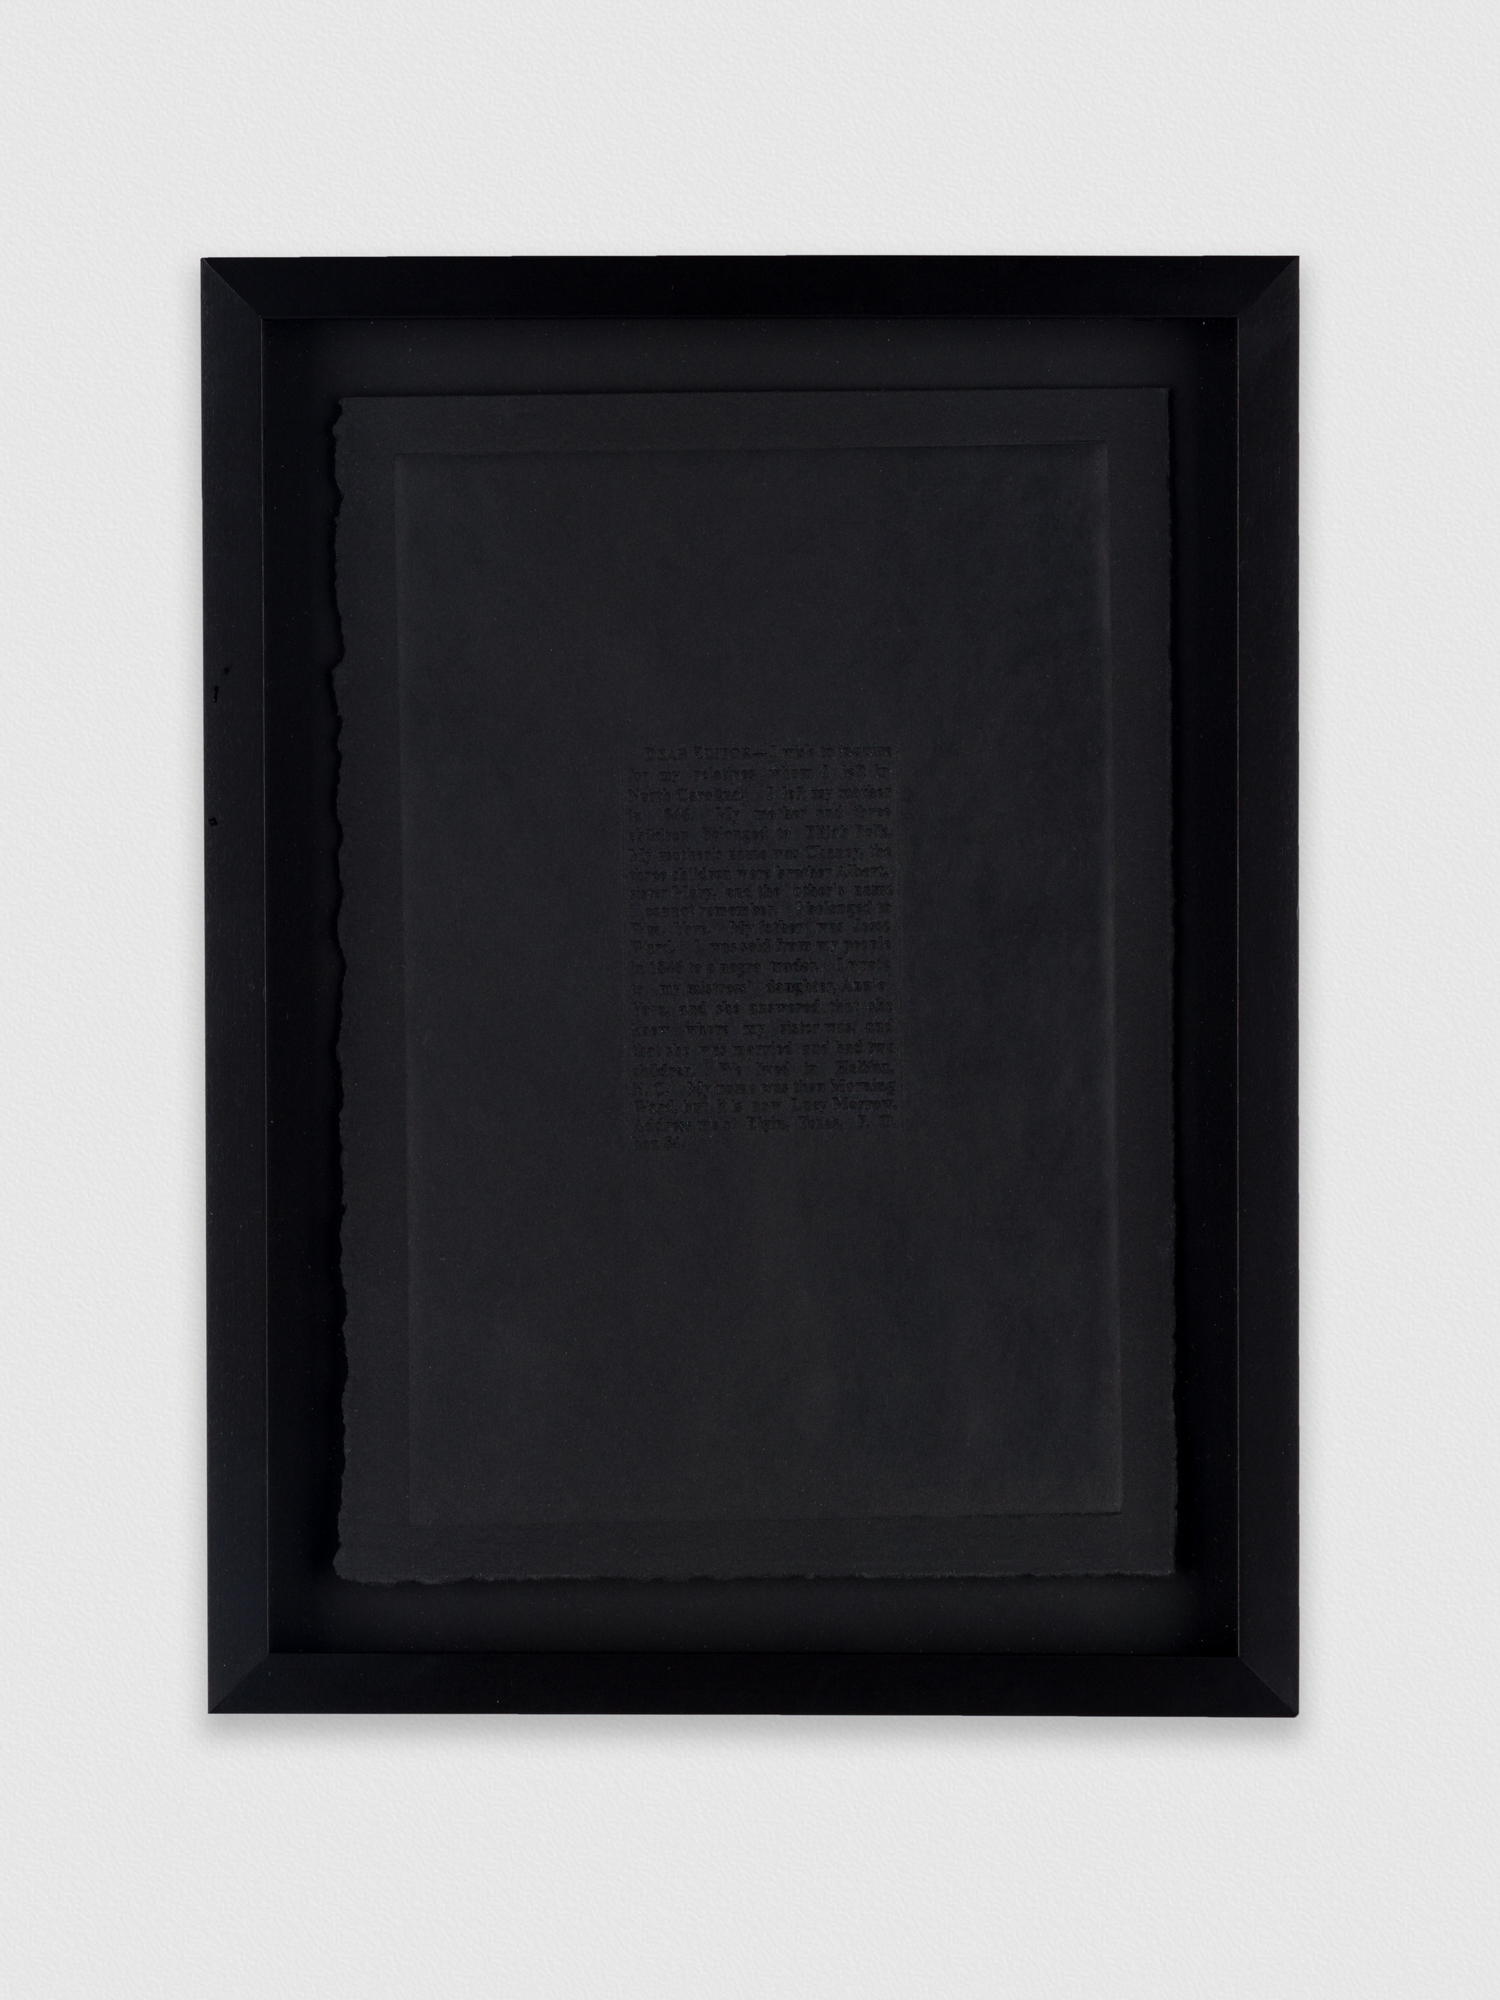 A framed piece of typed text that is almost completely redacted by a black rectangle